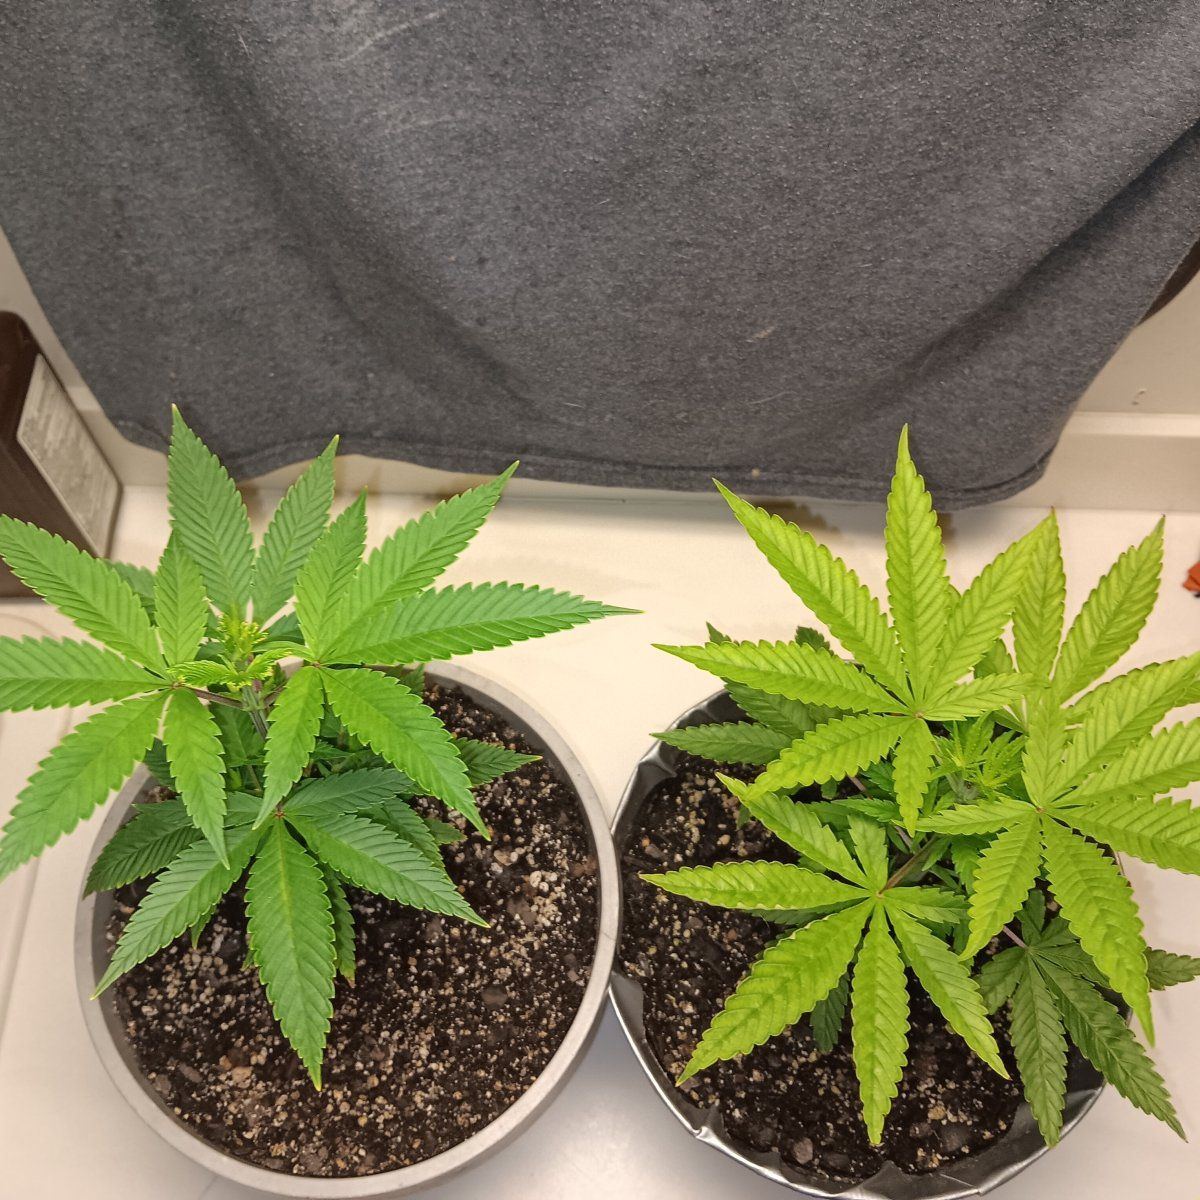 Any help would be appreciated new grower here having a color issue with one plant being too li 3